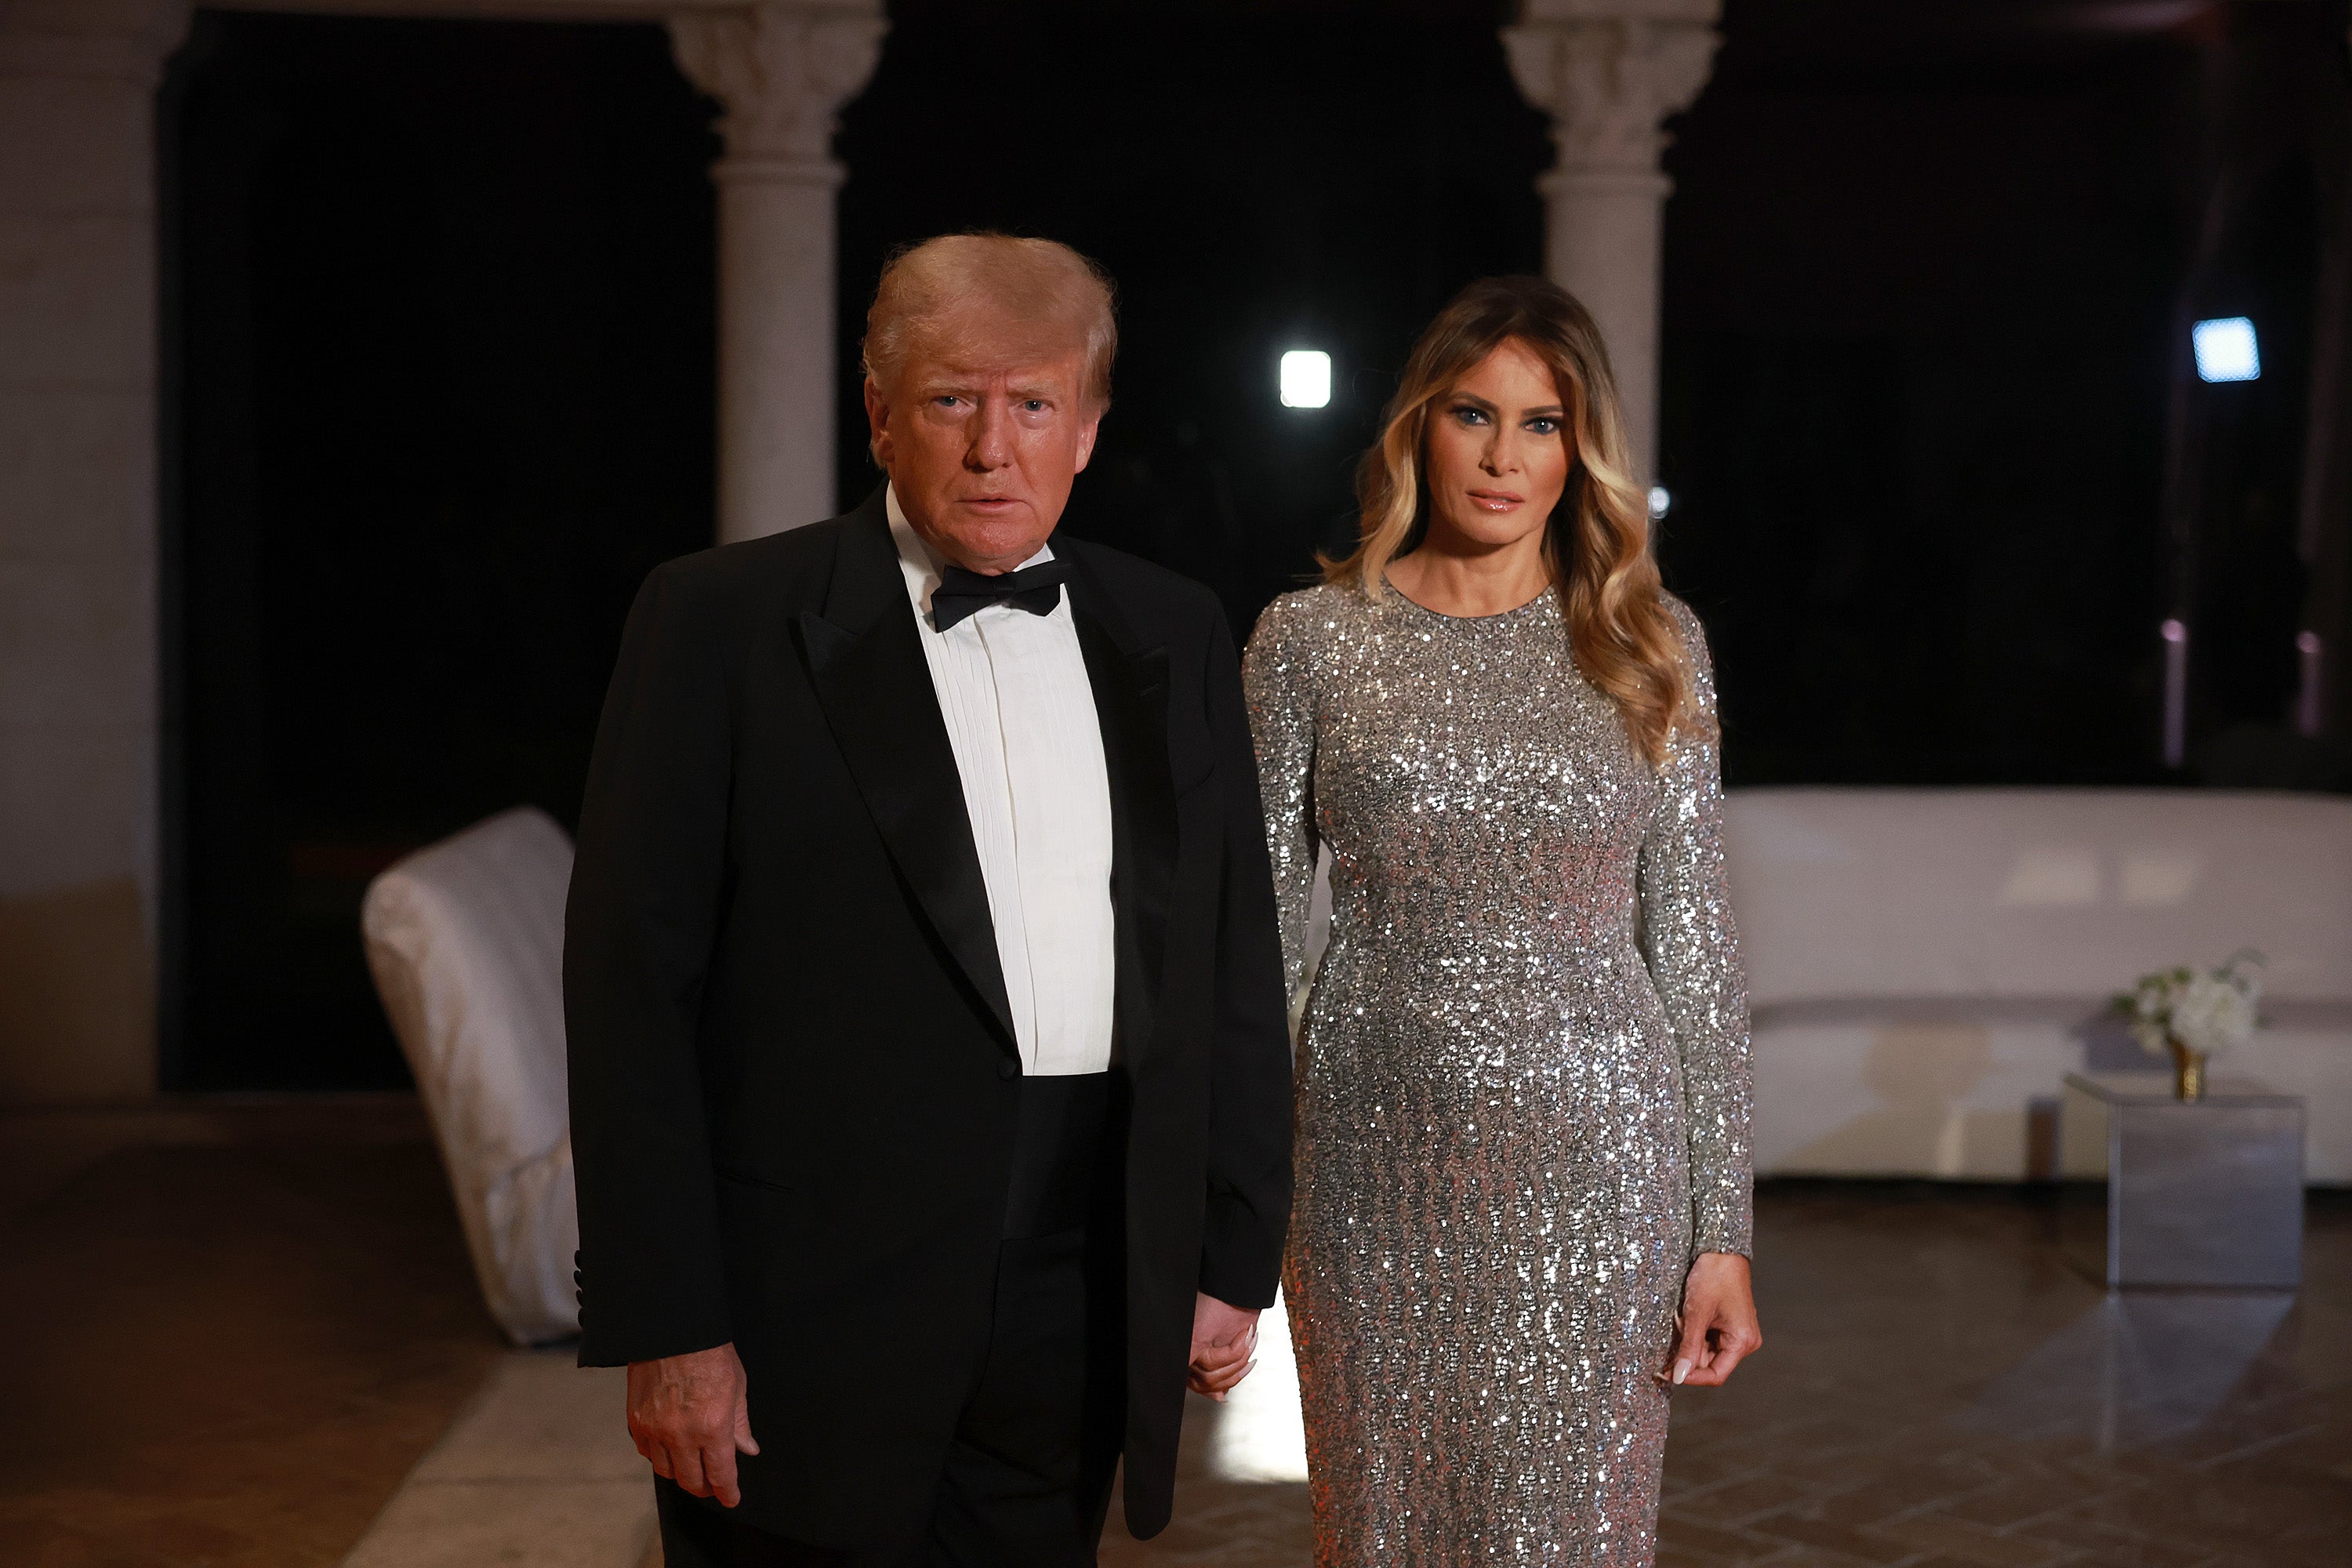 Former U.S. President Donald Trump and former first lady Melania Trump arrive for a New Years event at his Mar-a-Lago home on December 31, 2022 in Palm Beach, Florida